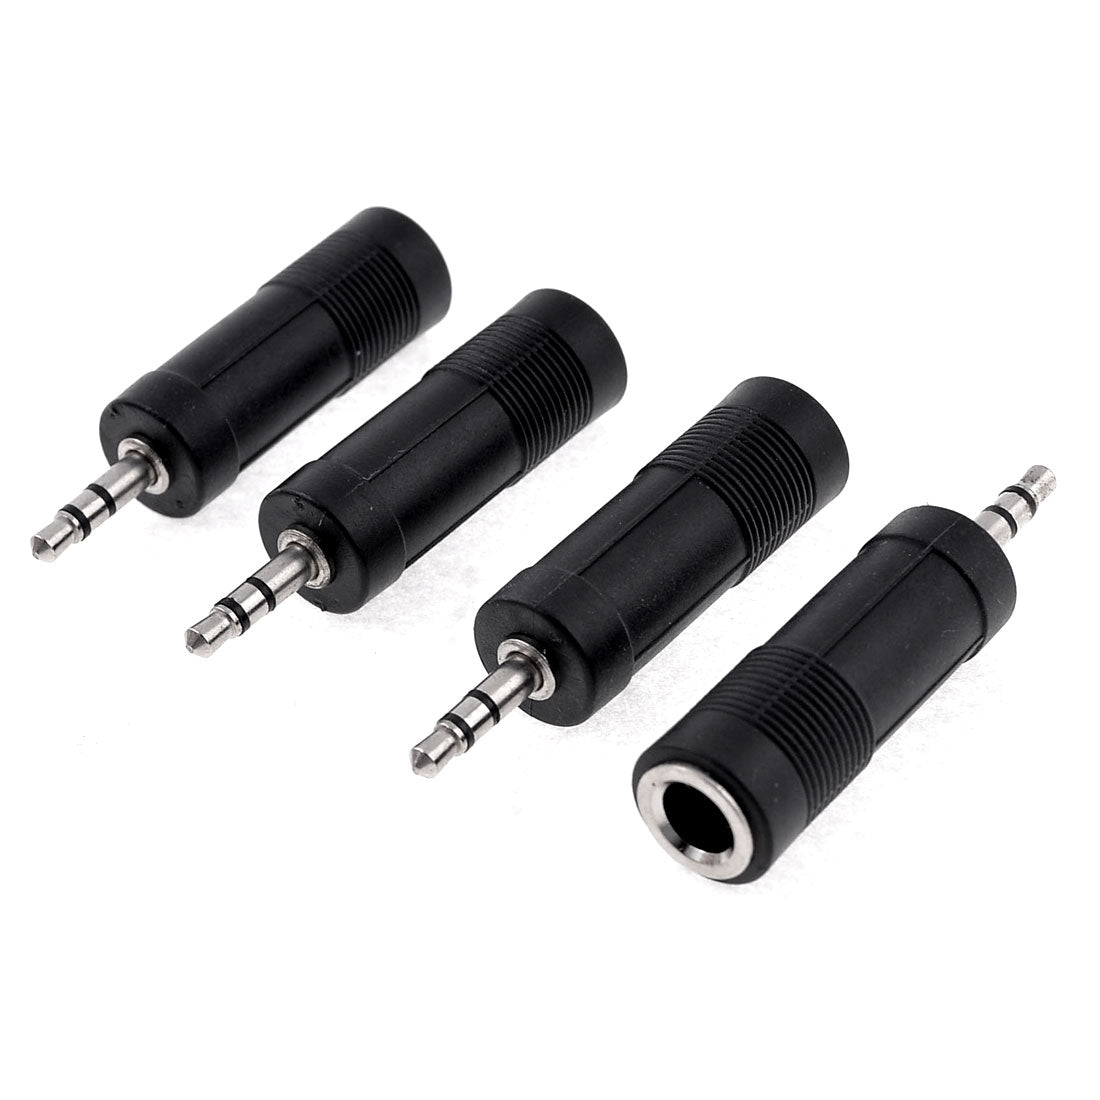 uxcell Uxcell 4 Pcs Black 3.5mm Stereo Male to 6.35mm Female Audio Jack Connector Adapter